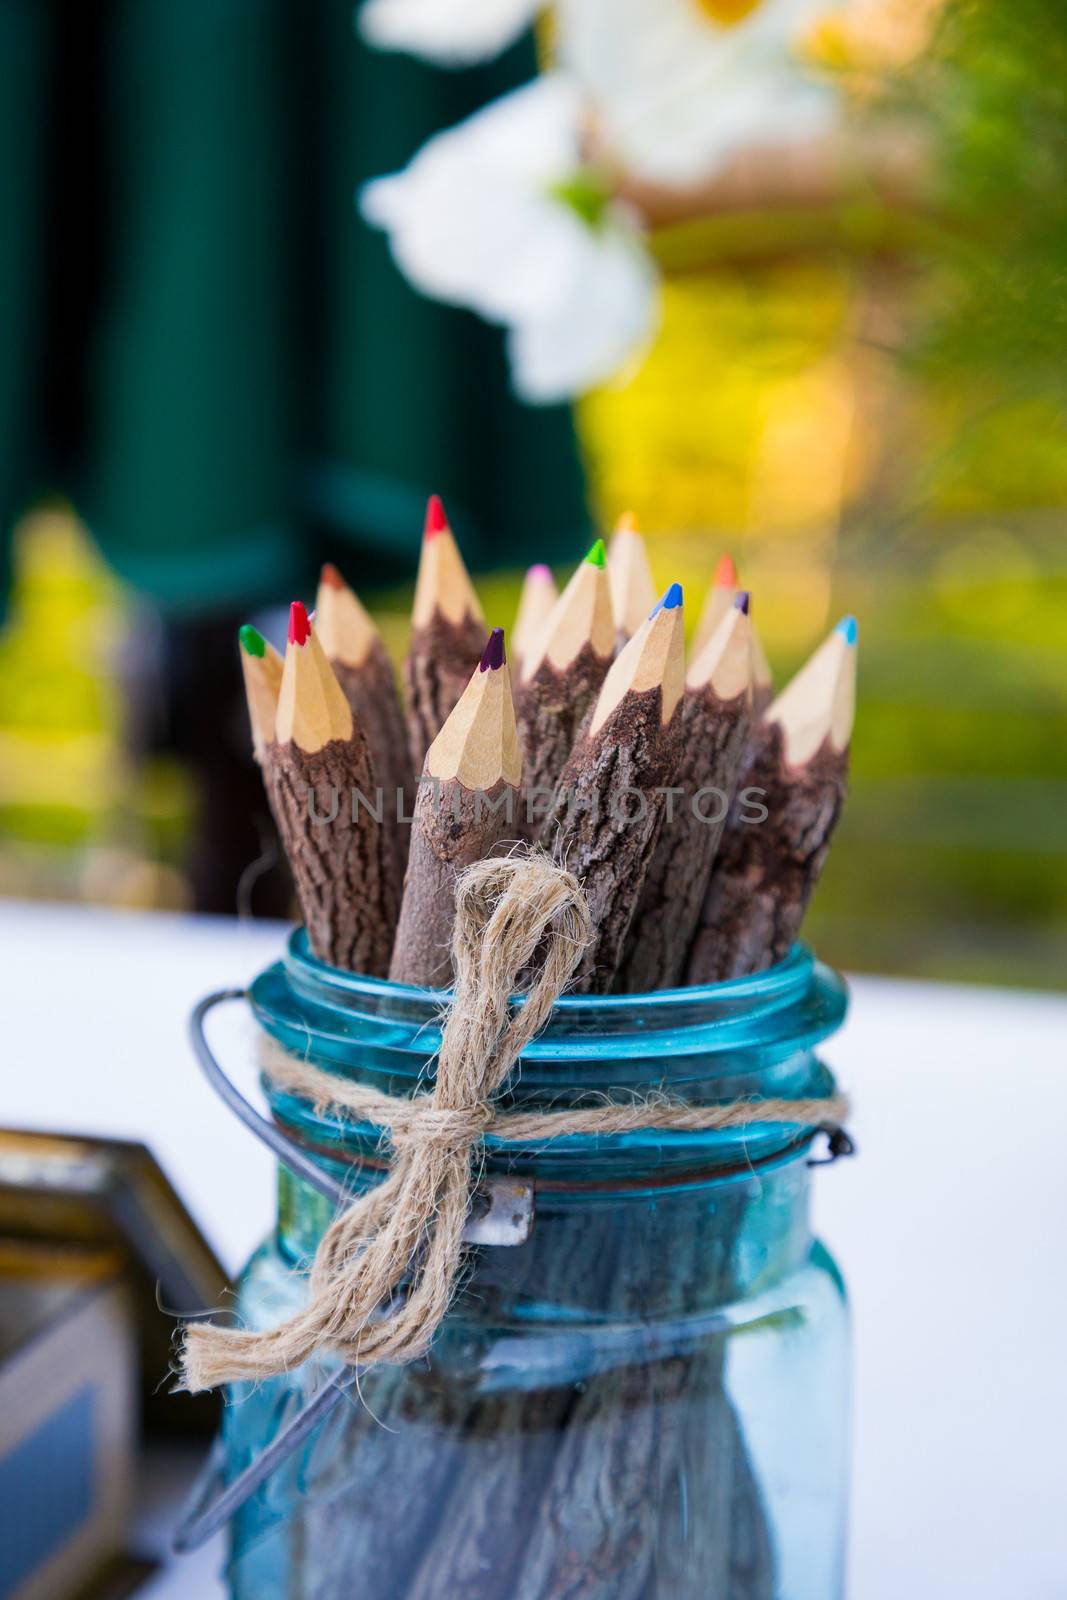 These color pencils are in a blue jar at a wedding for the guests to use to write or draw.